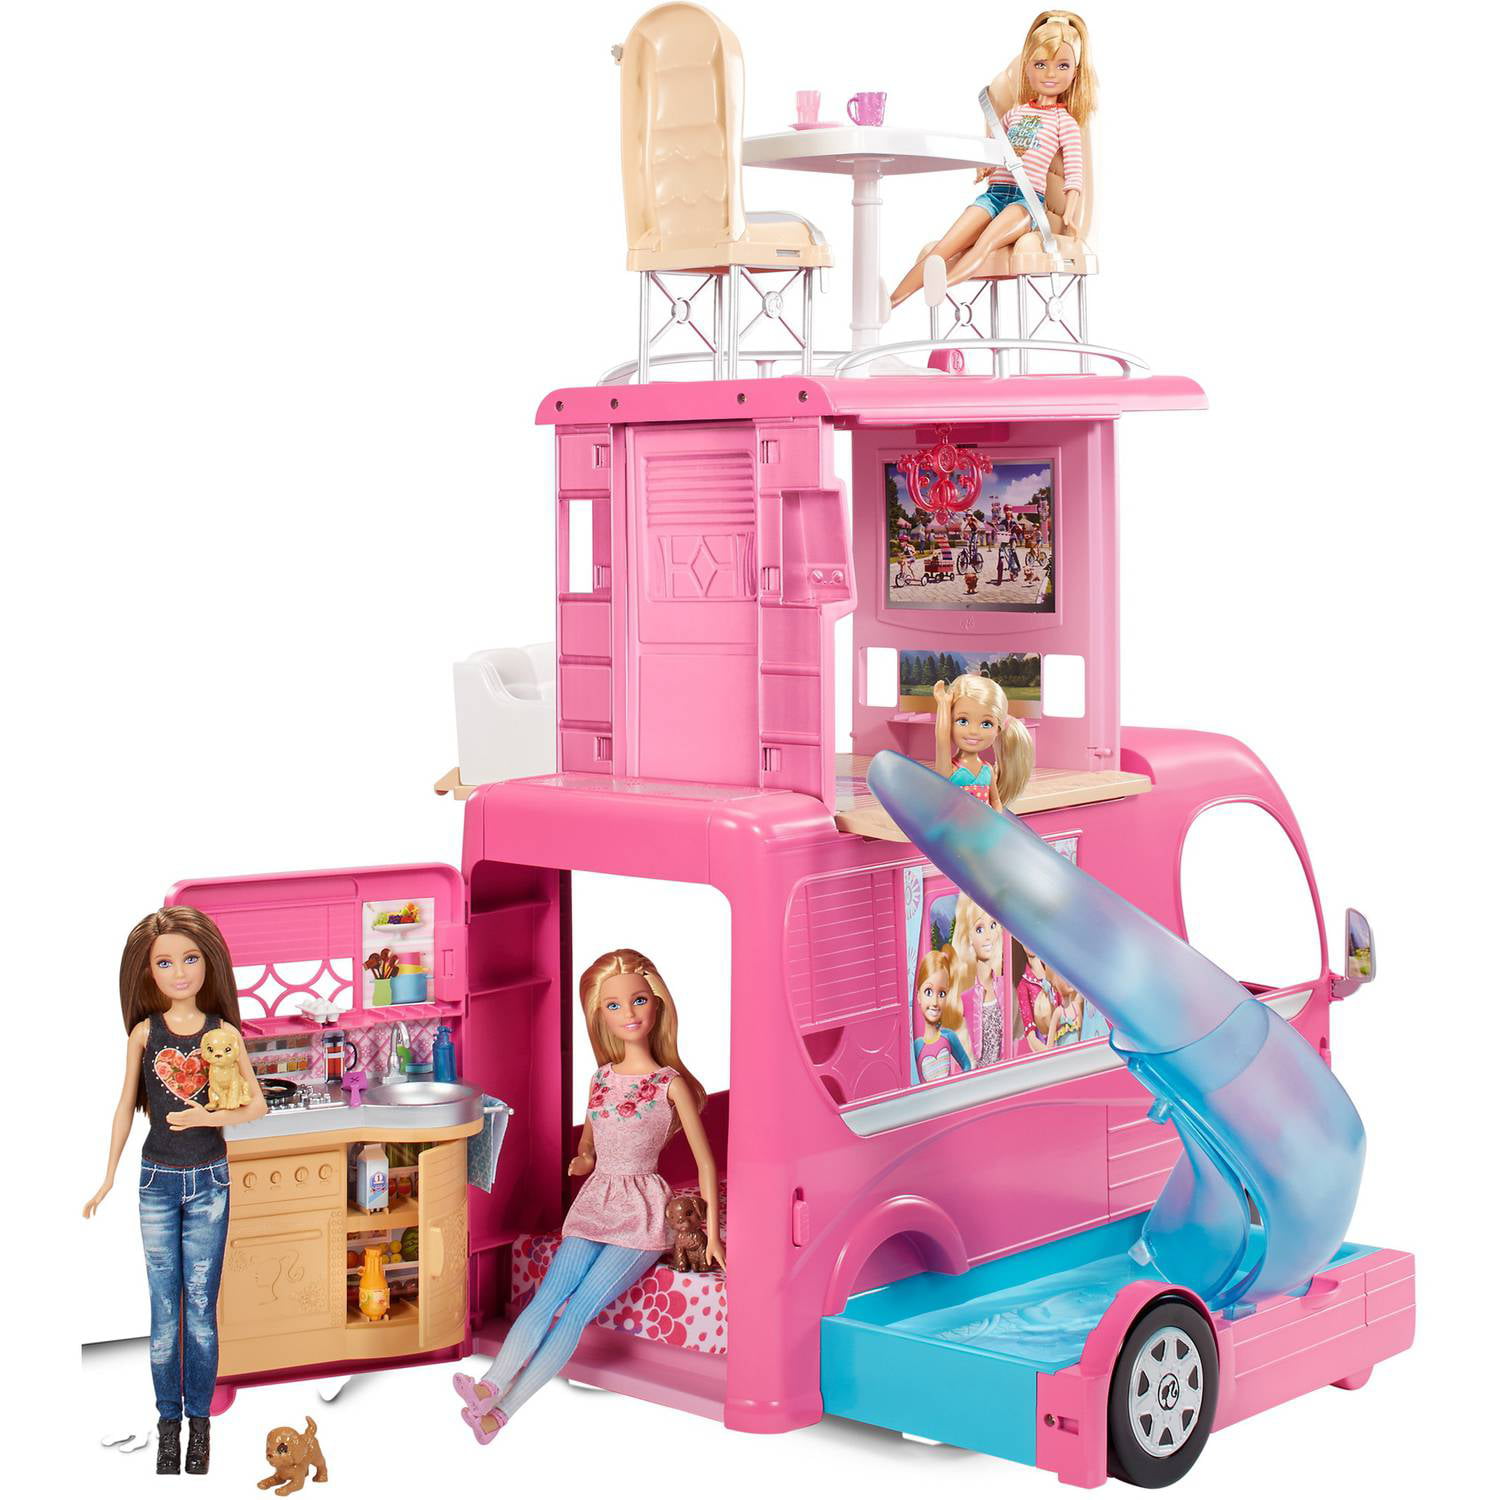 New Barbie Pop-Up Camper Play Set with 3 Levels of Fun and Pool Toy Review.  DisneyToysFan. - video Dailymotion